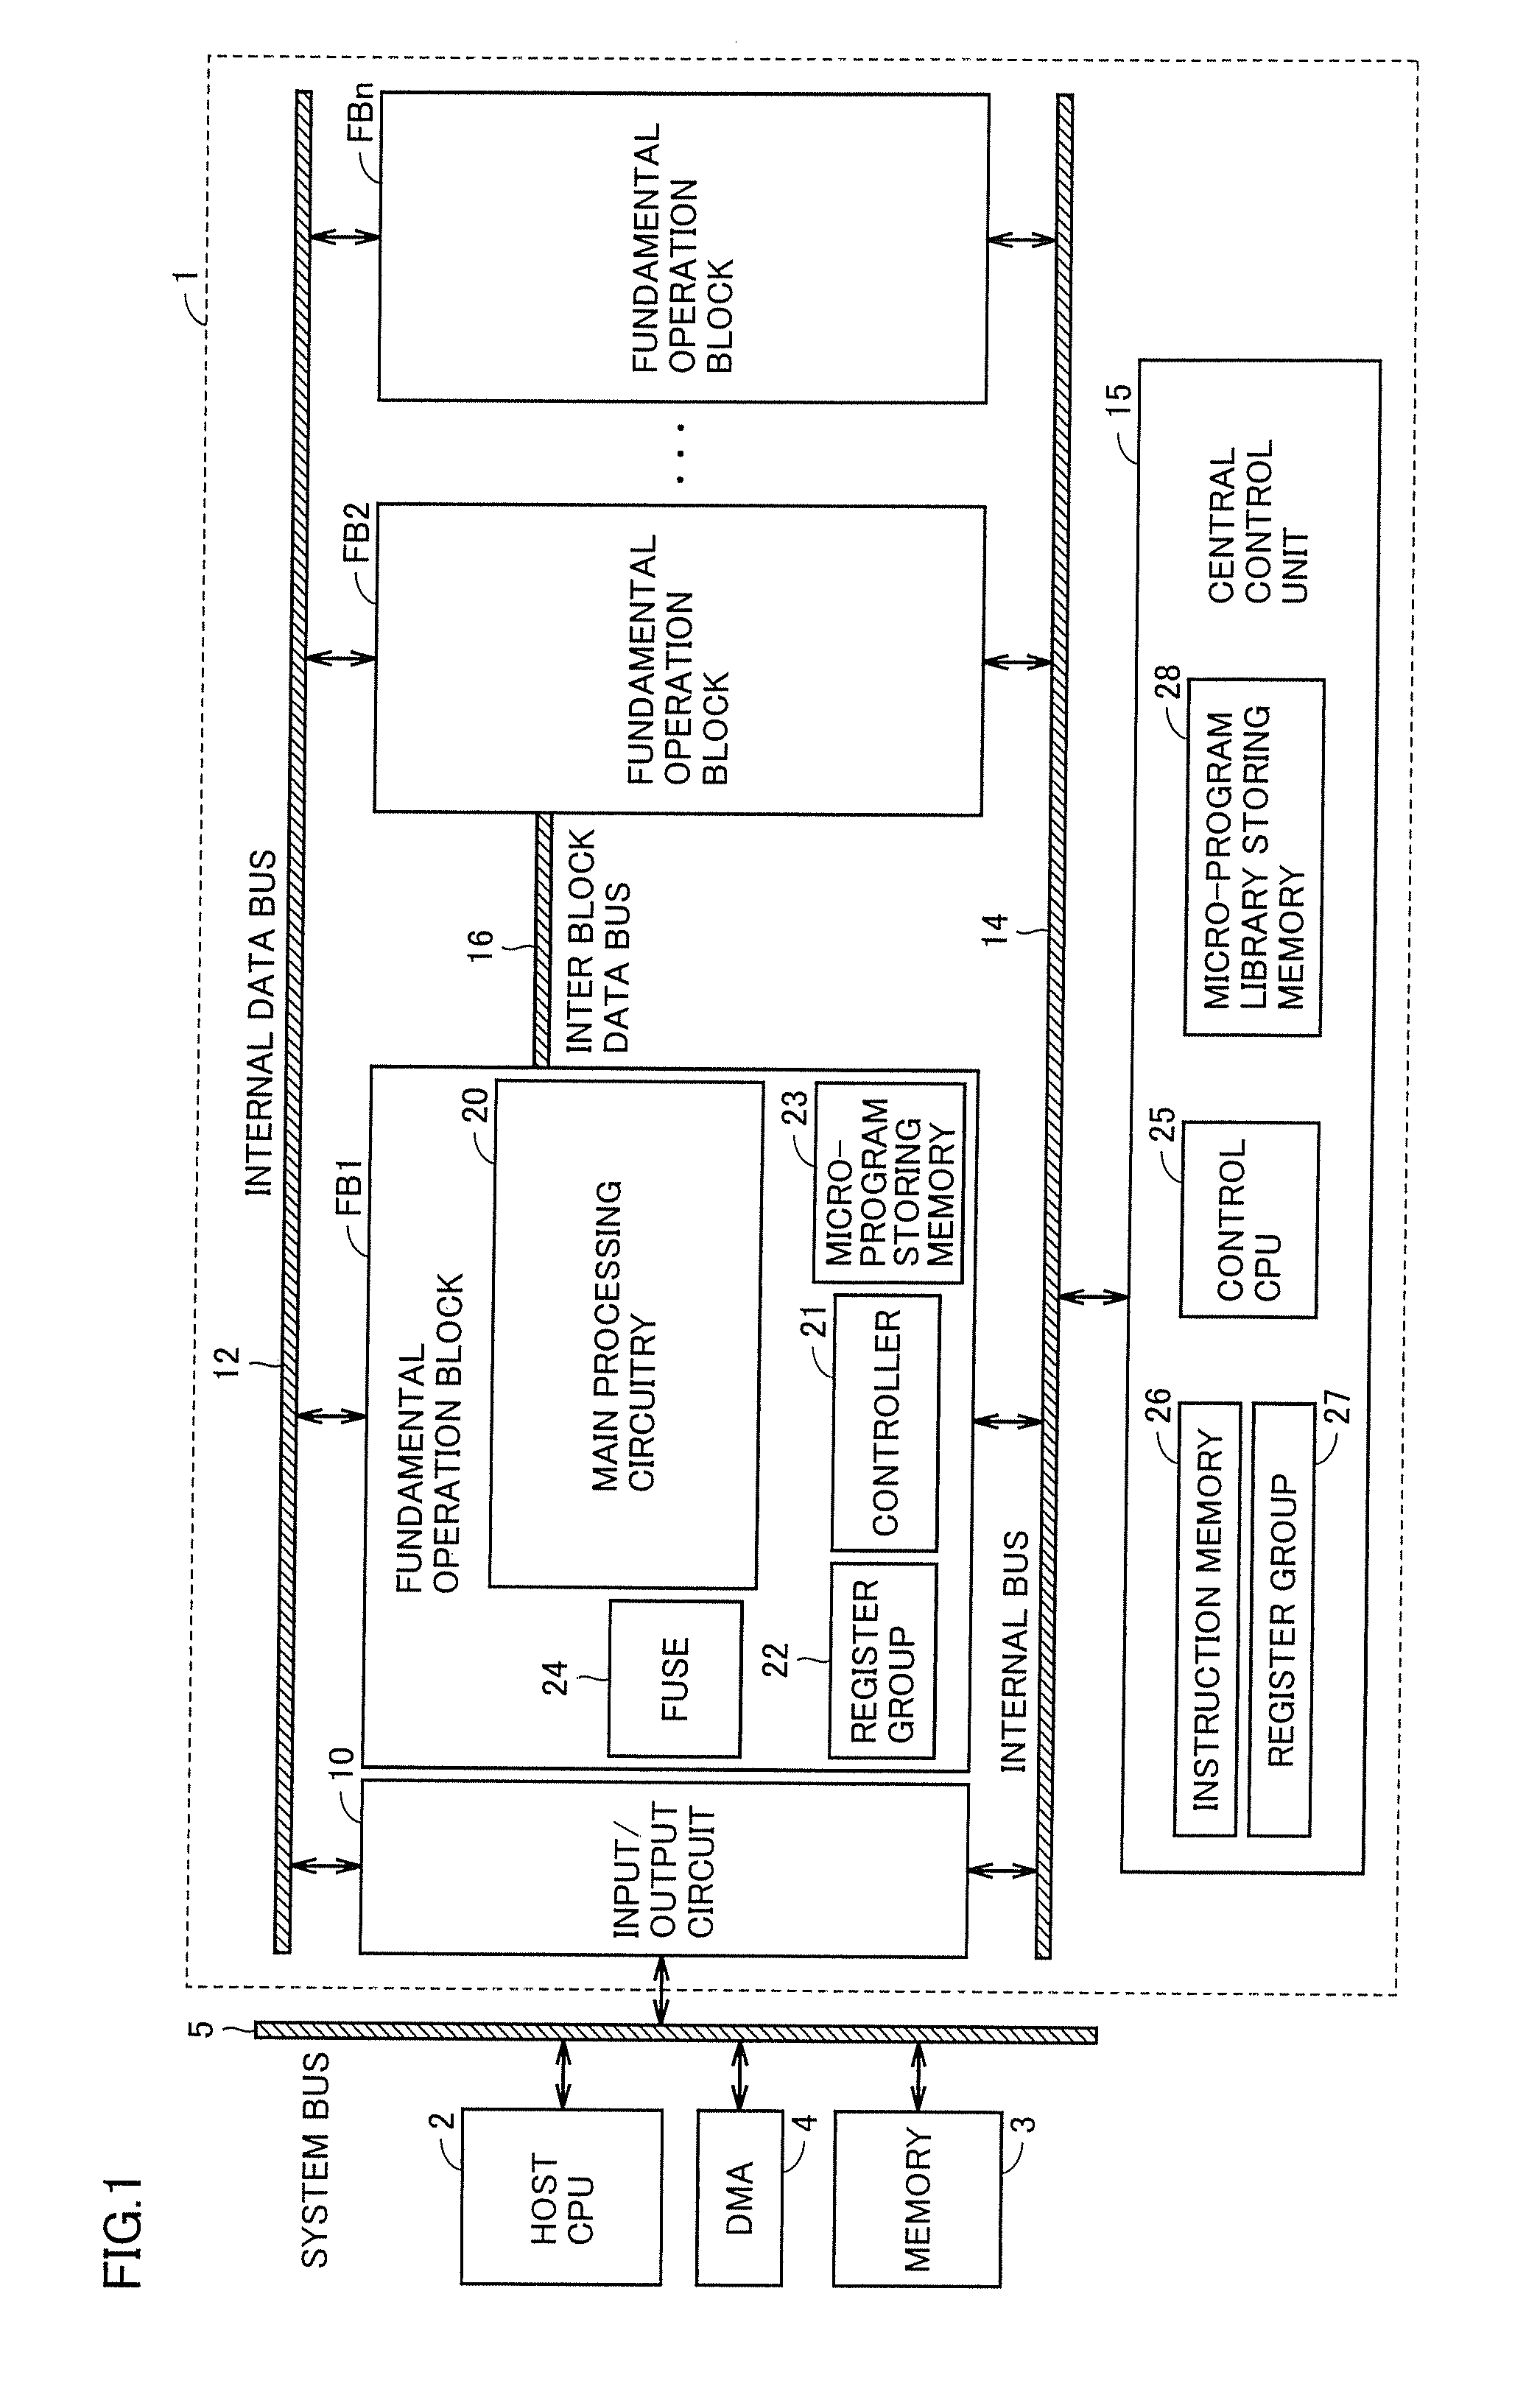 Parallel operation device allowing efficient parallel operational processing